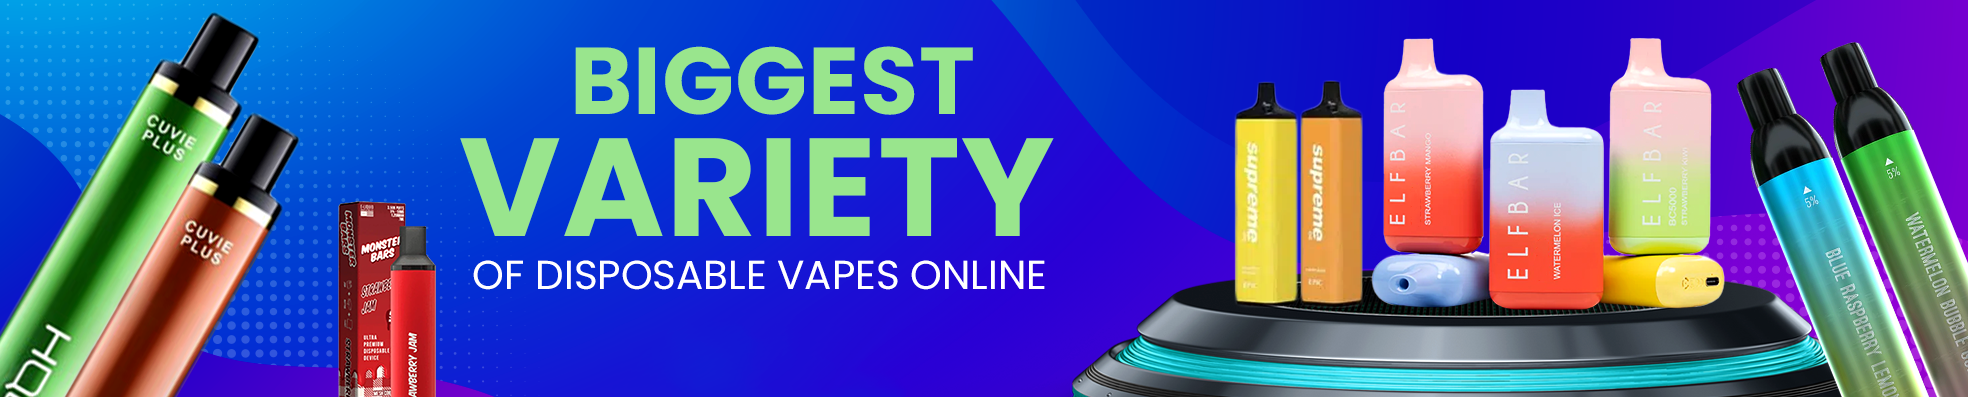 Best Disposable Vape Kits from £2.99 - Idea Vape - FREE DELIVERY